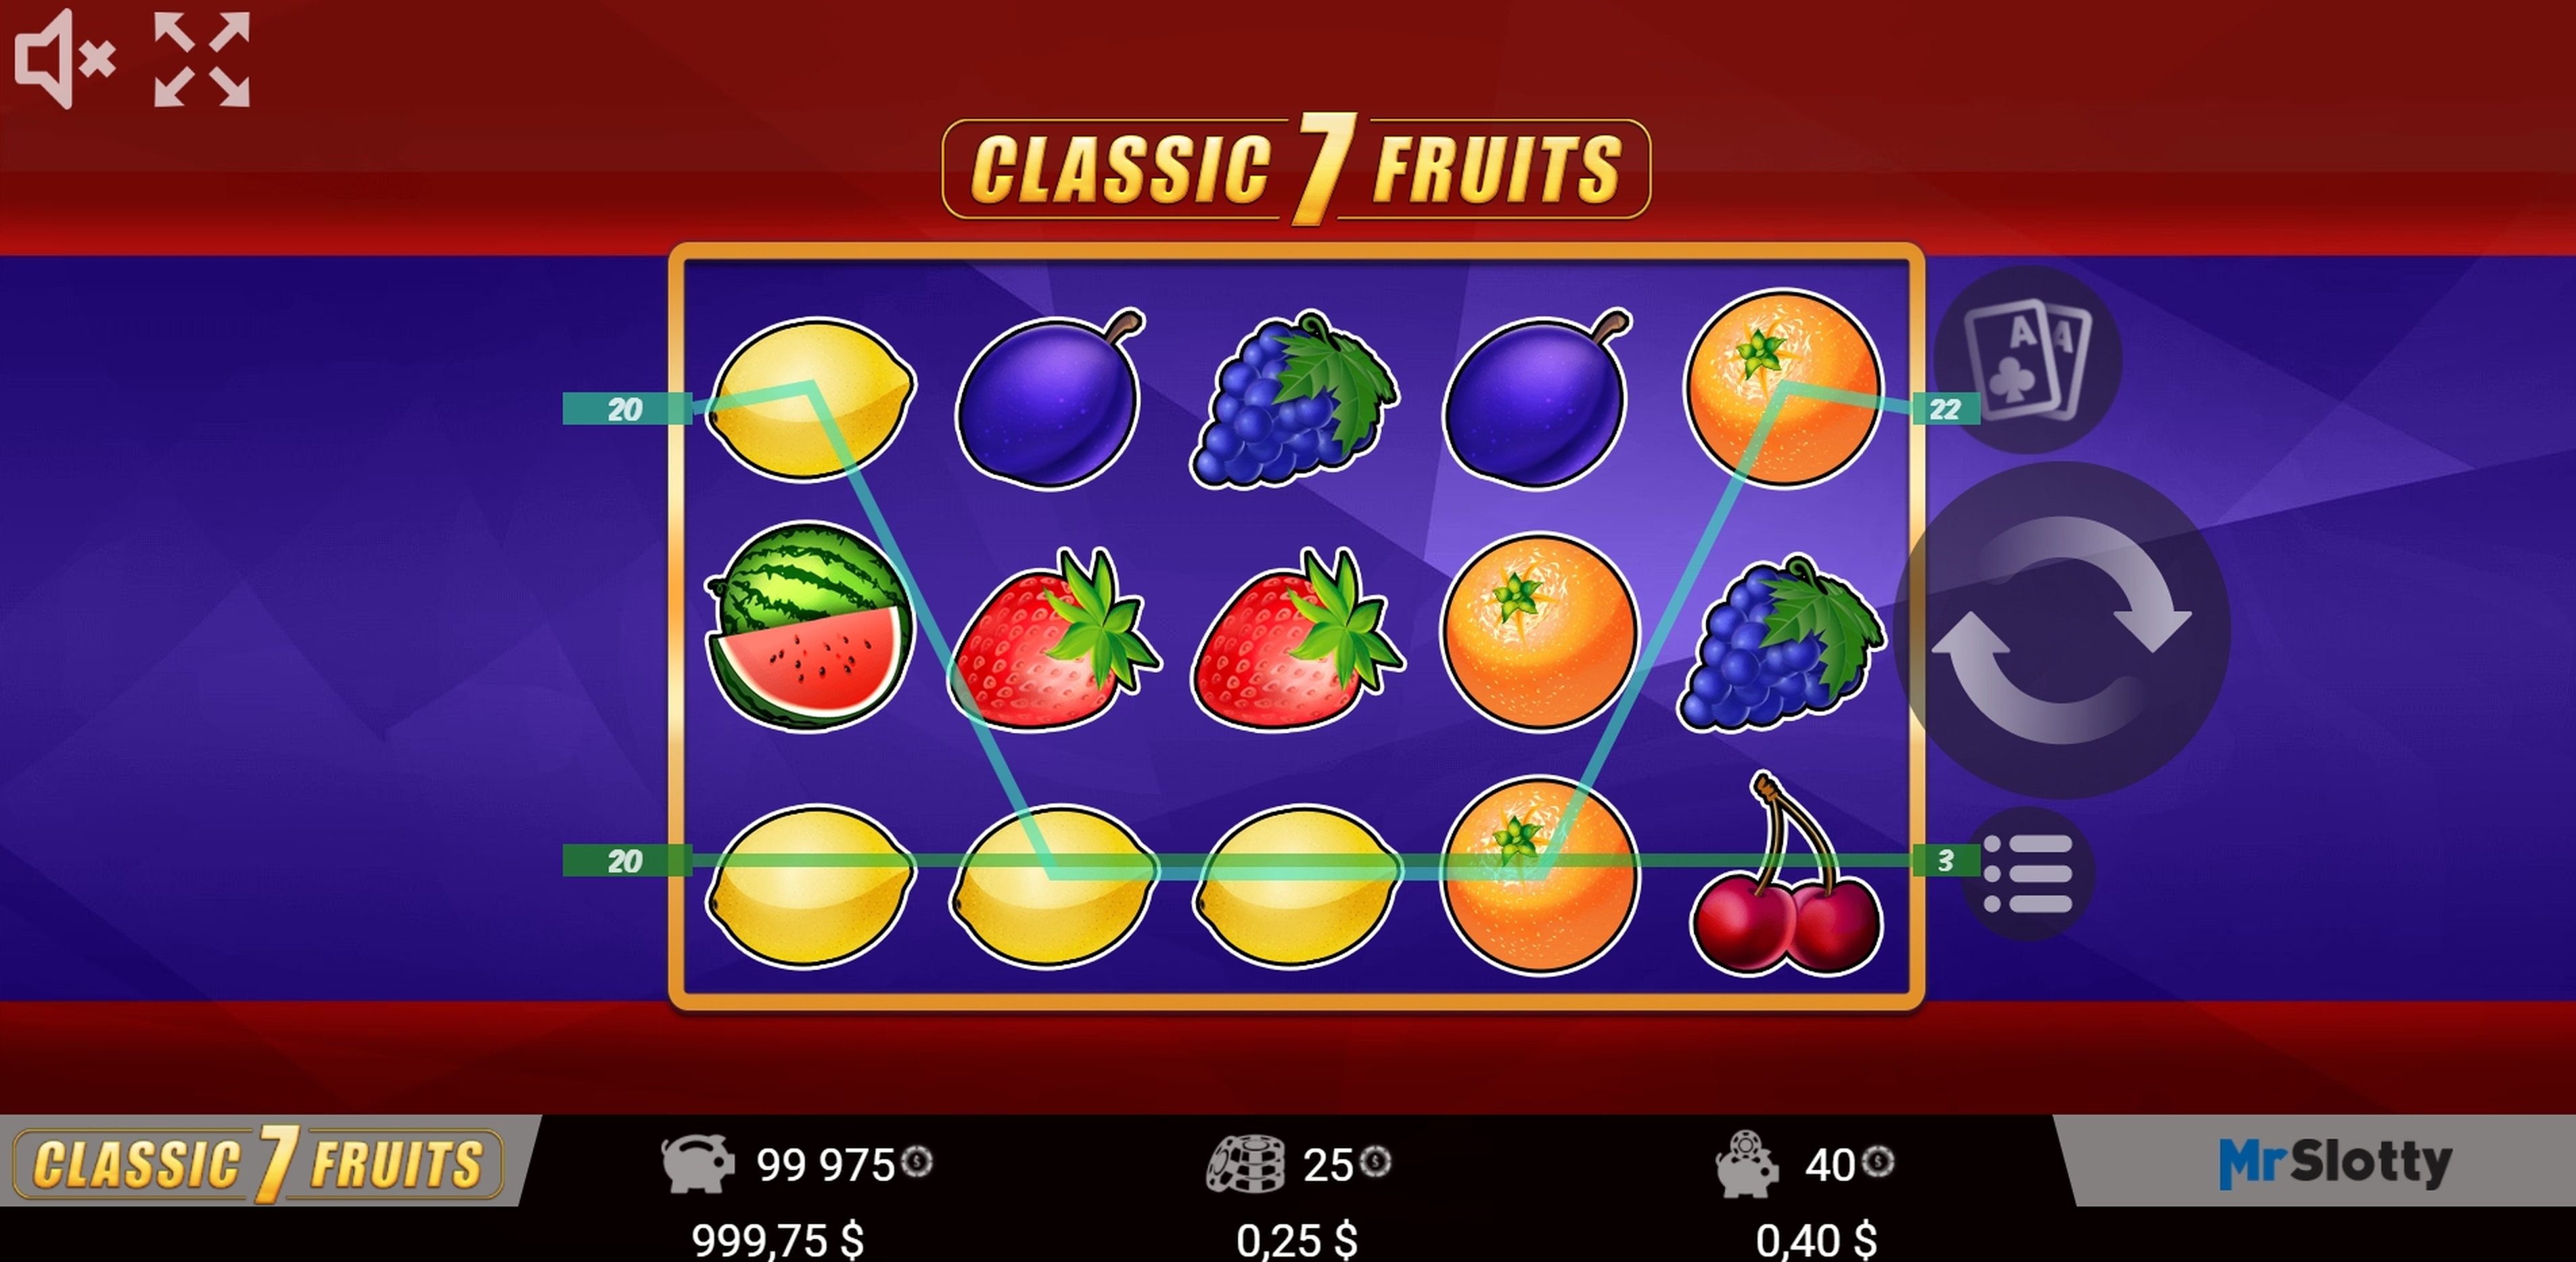 Win Money in Classic 7 Fruits Free Slot Game by Mr Slotty